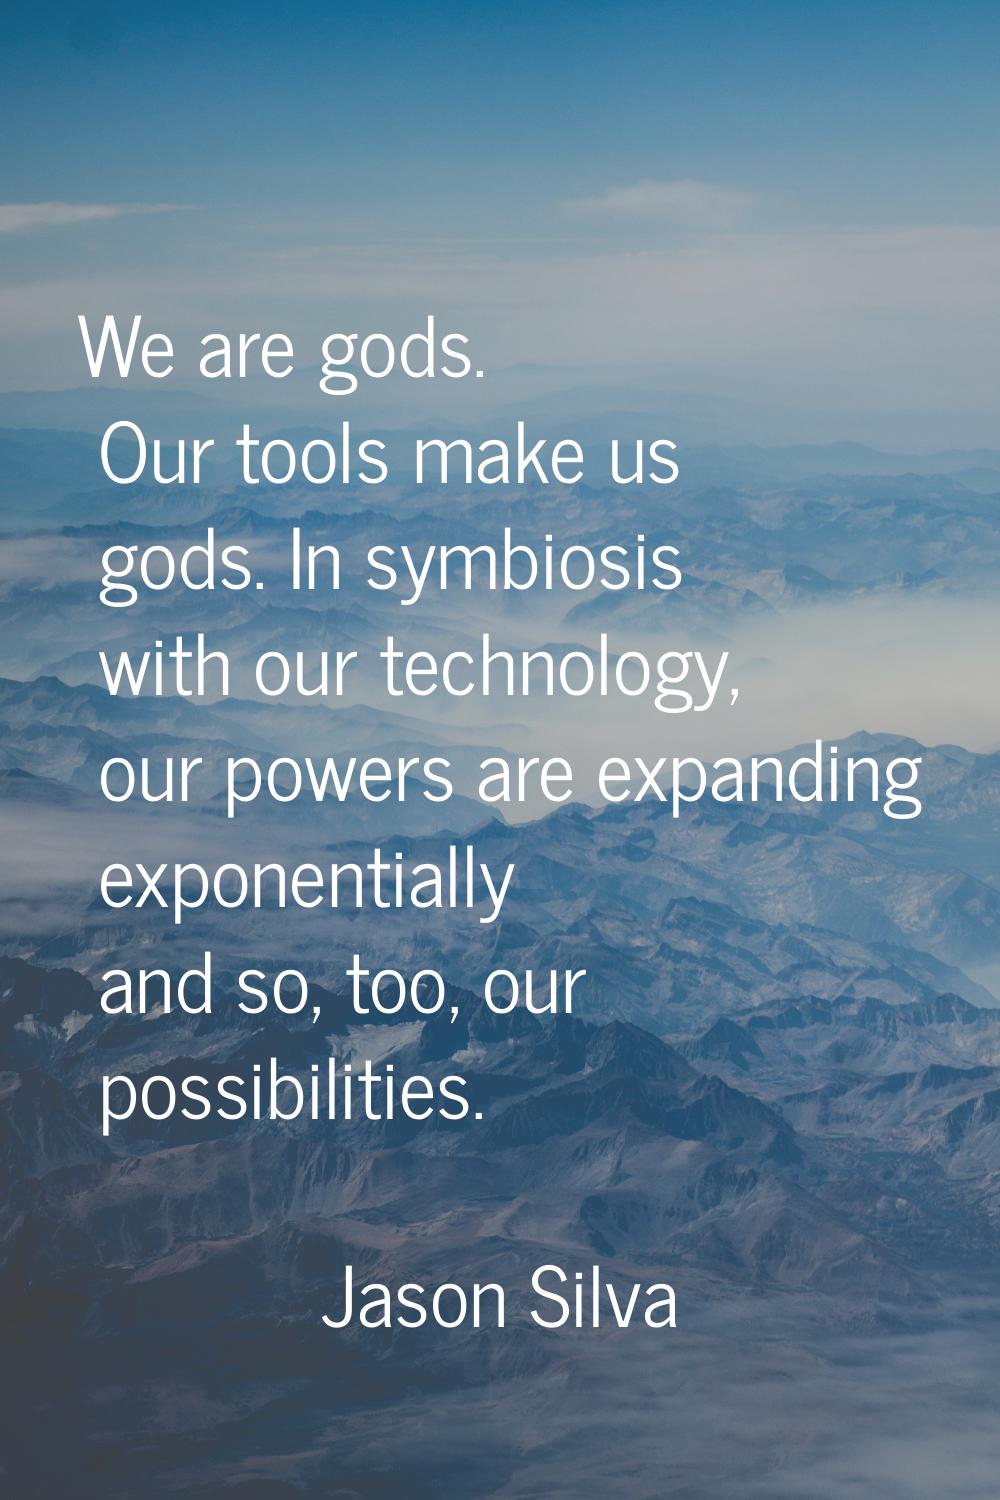 We are gods. Our tools make us gods. In symbiosis with our technology, our powers are expanding exp